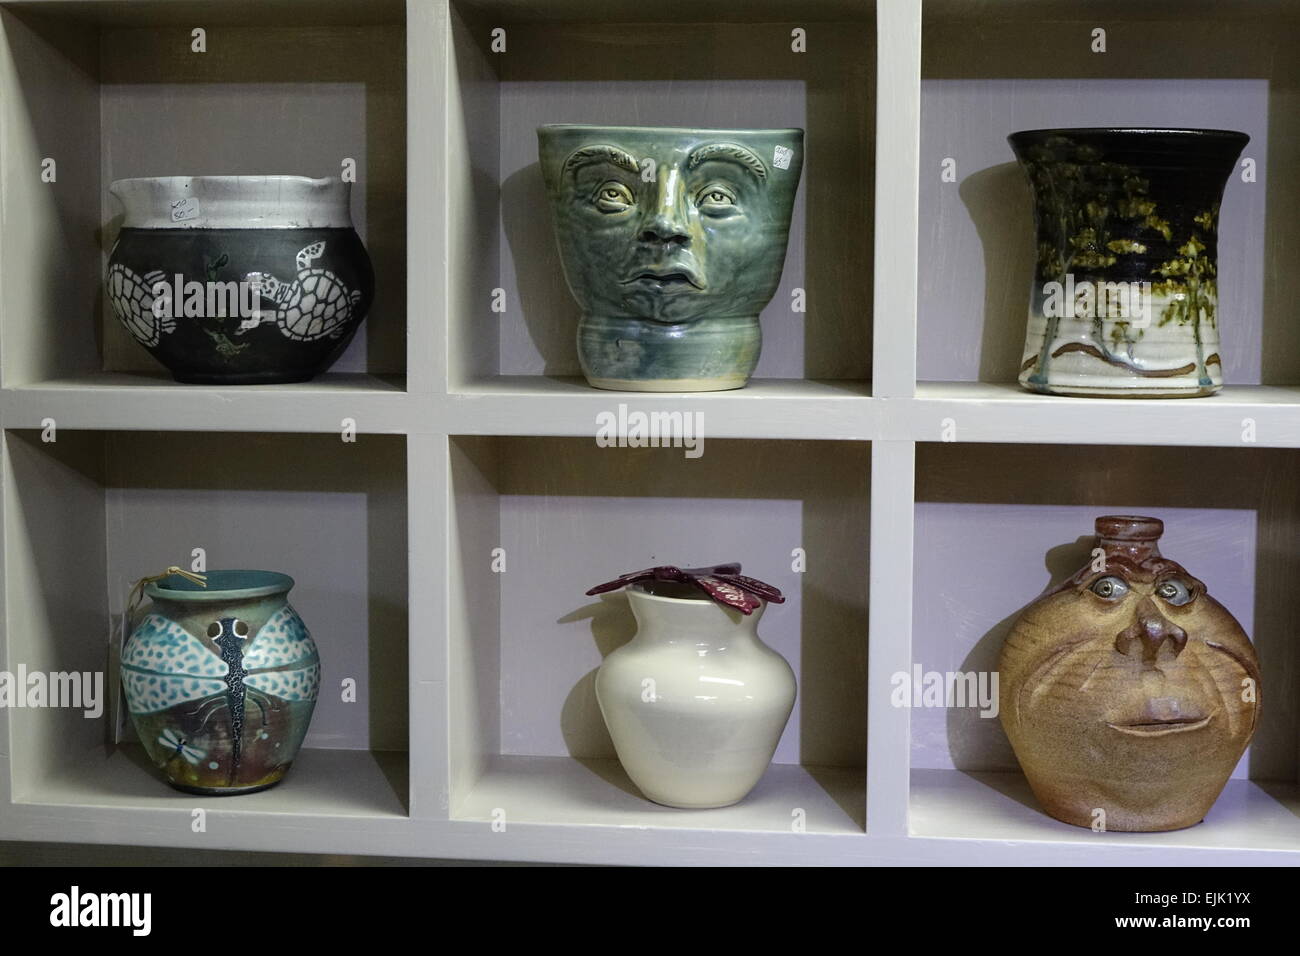 Display of pottery pieces during art show Stock Photo